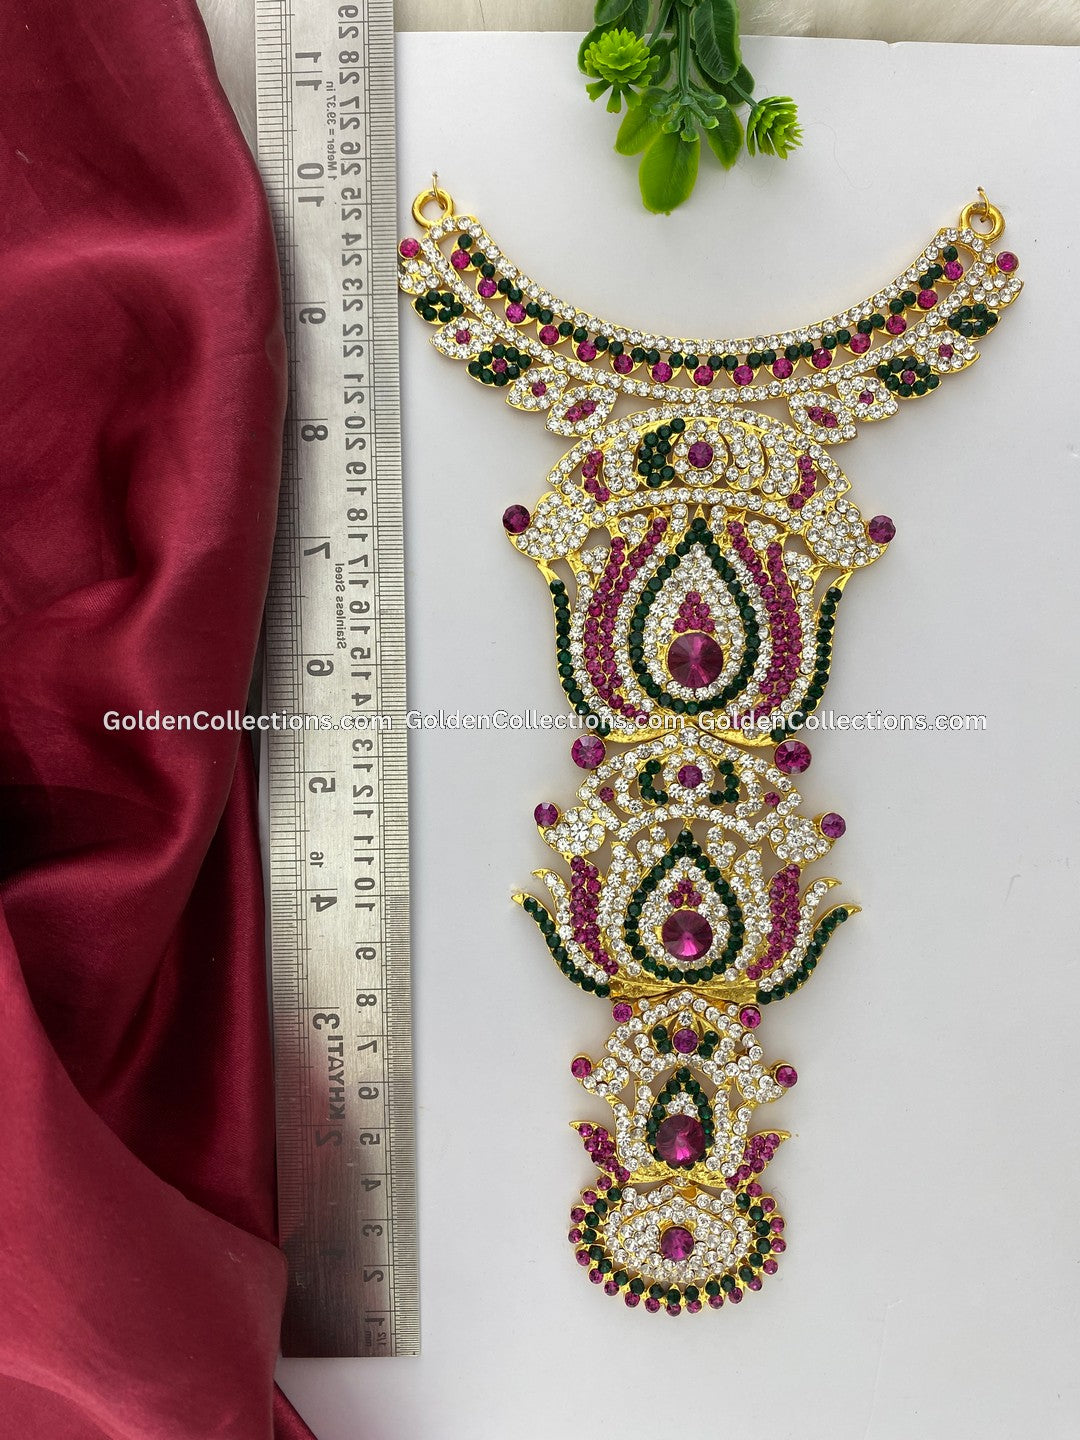 Shop now for Deity Jewellery - GoldenCollections DLN-039 2